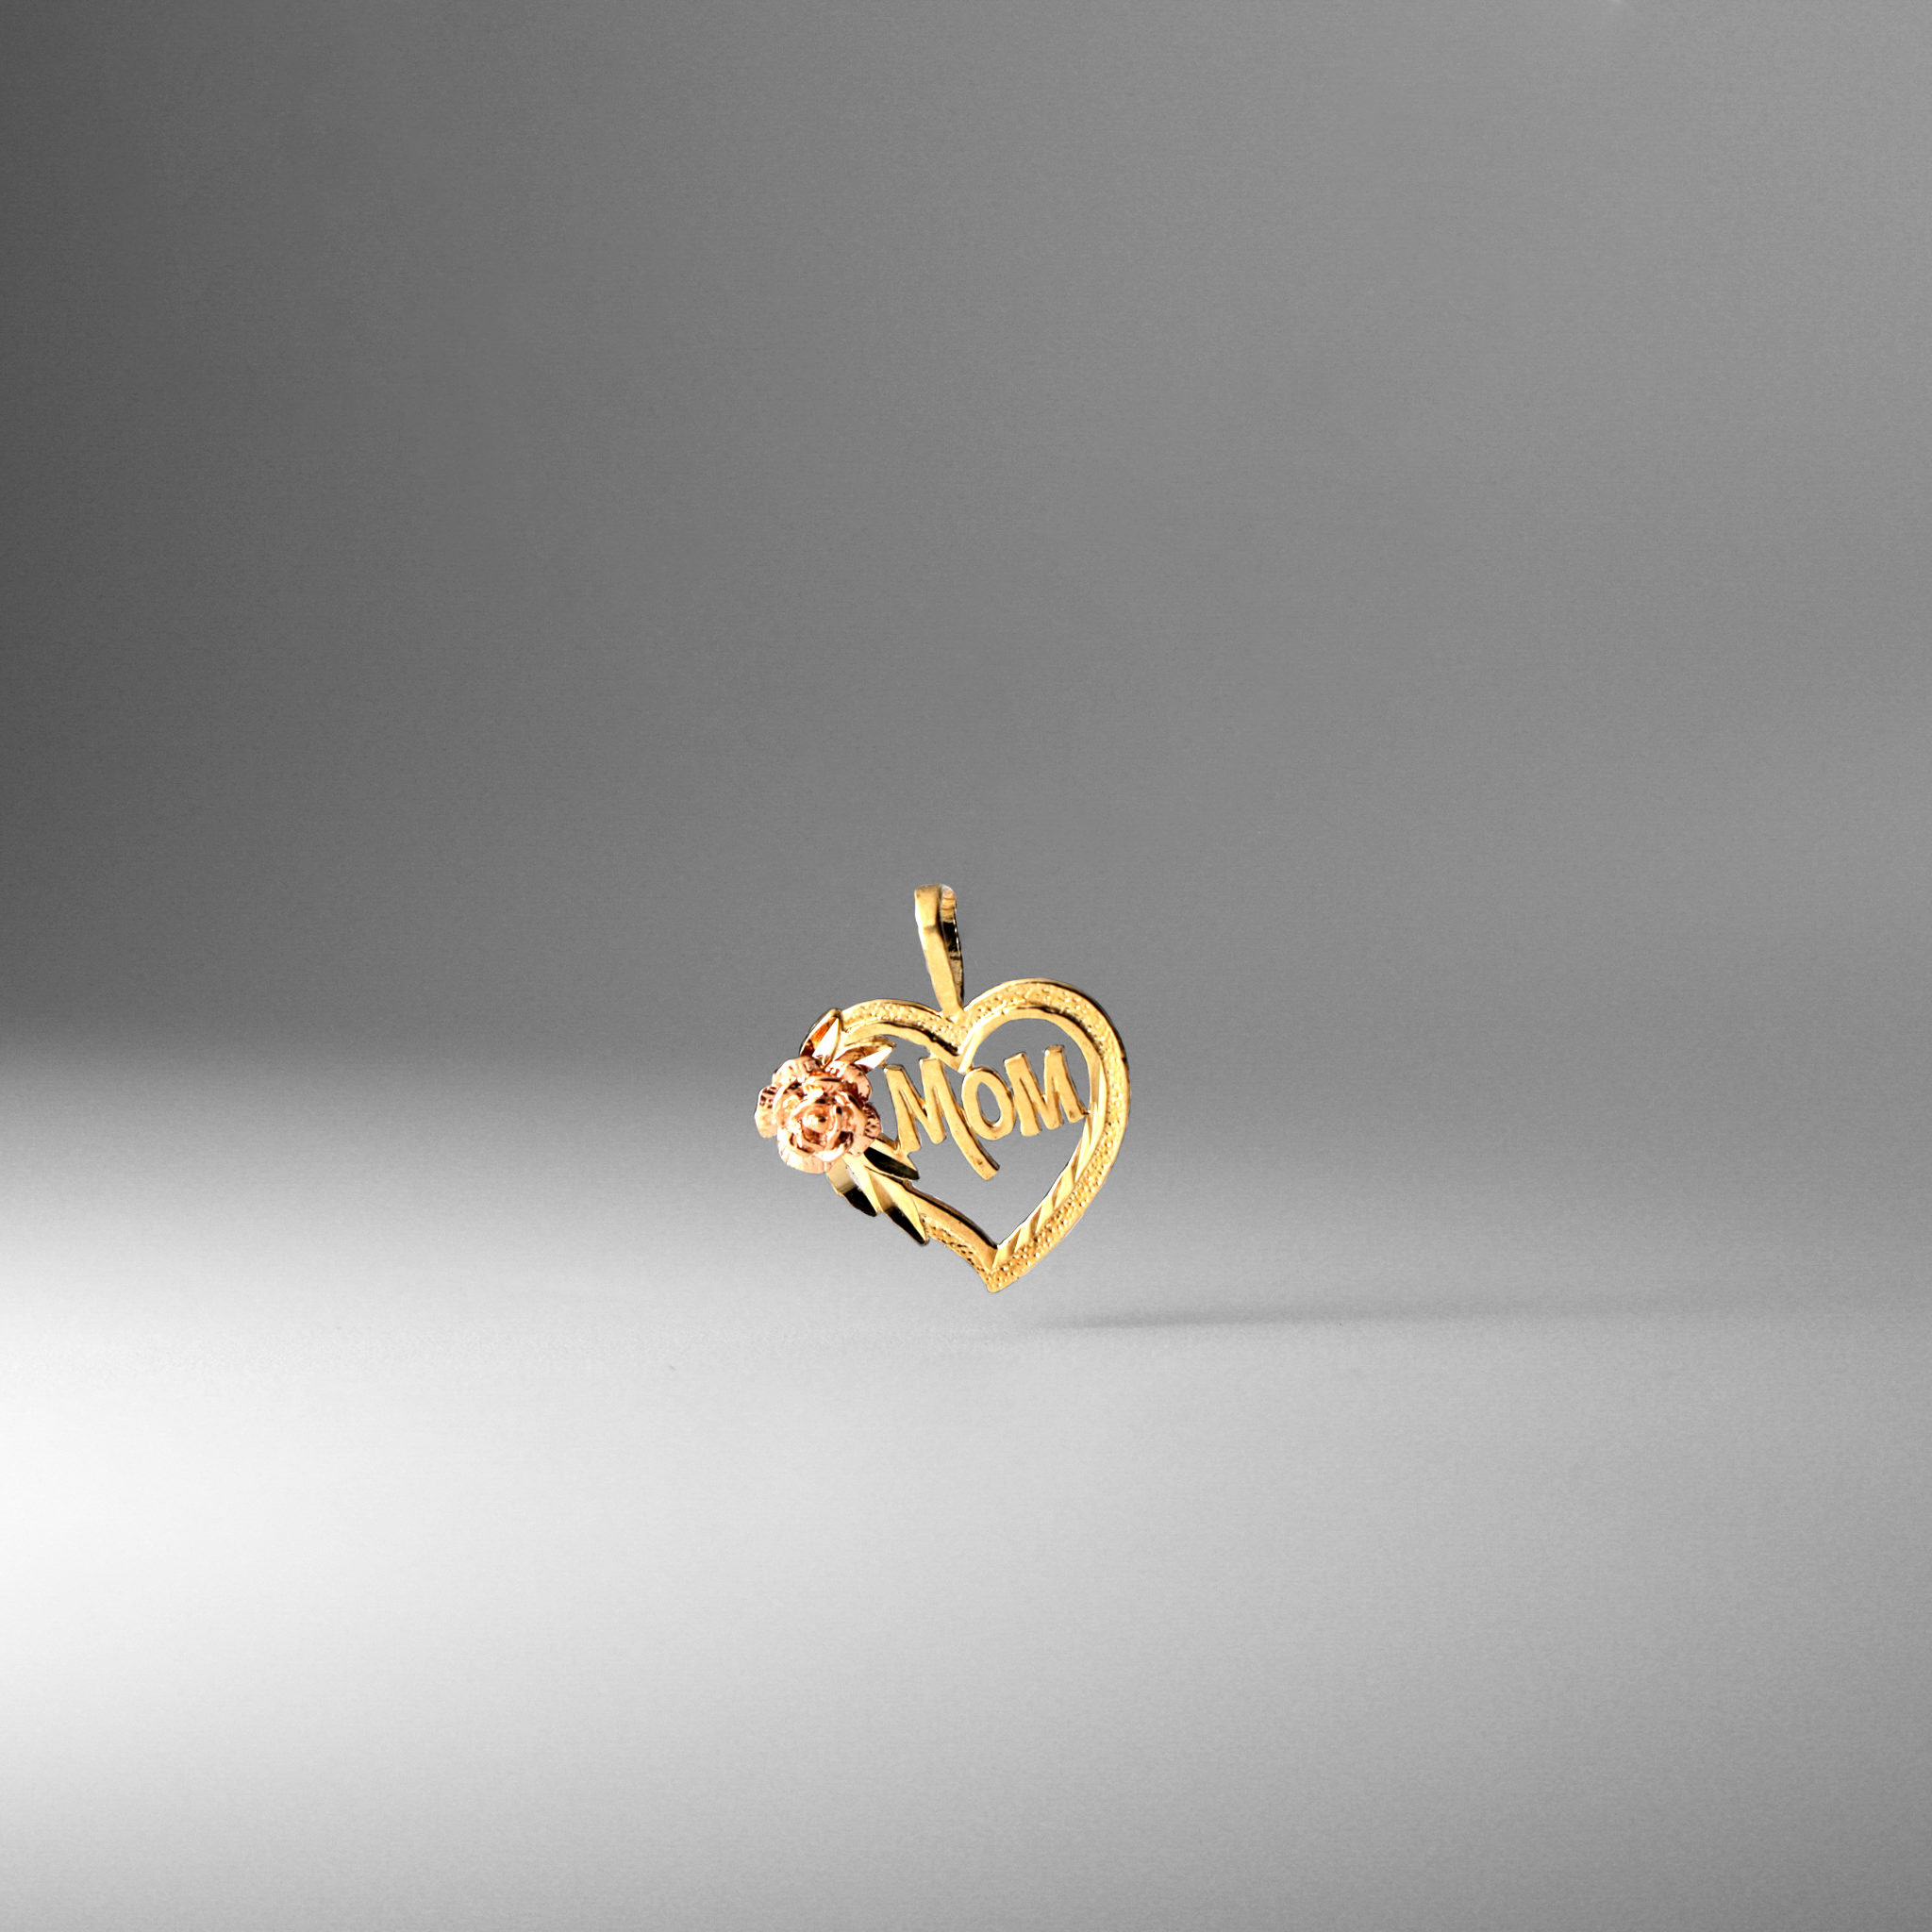 Love for Mom Gold Pendant Model-1838 - Charlie & Co. Jewelry